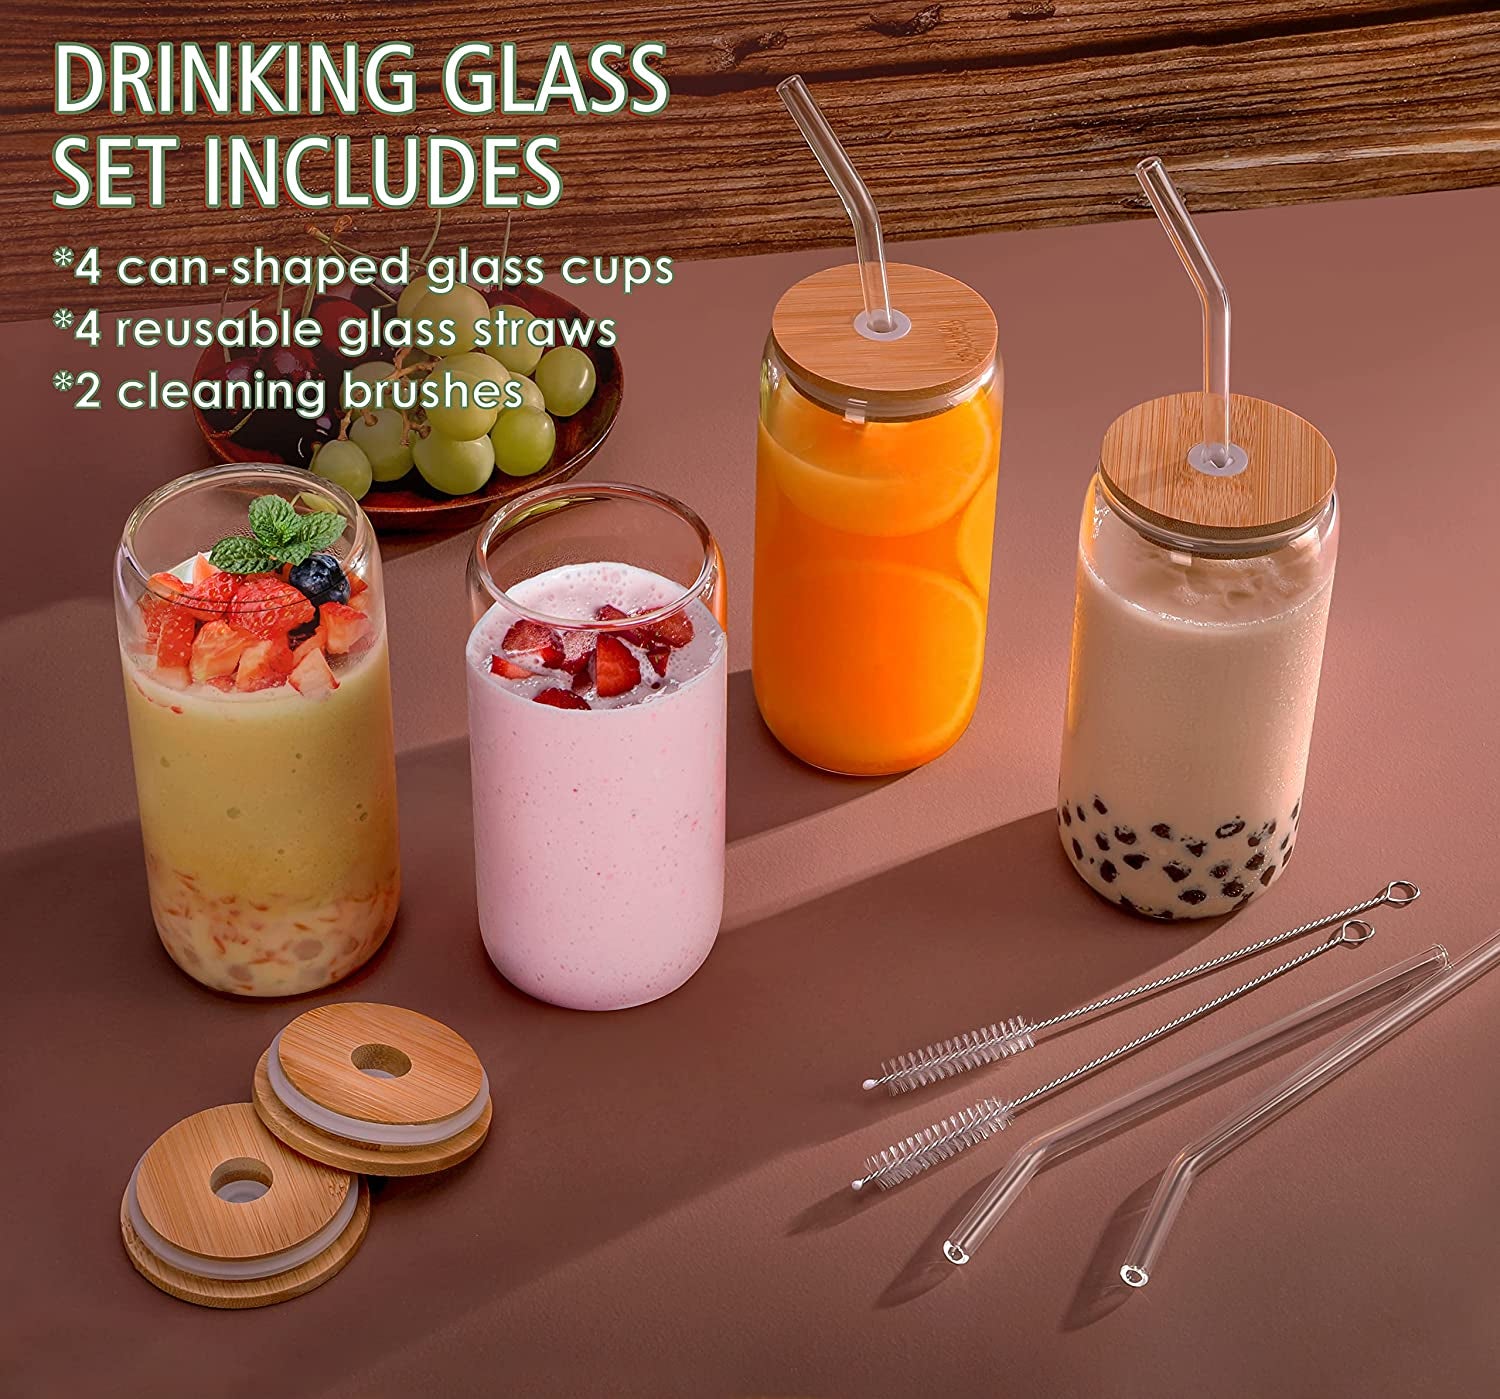 4Pcs Set Drinking Glasses with Bamboo Lid and Glass Straw - 16Oz Can Shaped Drinking Glass Set, Iced Coffee Mug, Cute Tumbler Cup, Whiskey, Cocktail, Water- Gift Best Choice - 2 Cleaning Brushes (4)